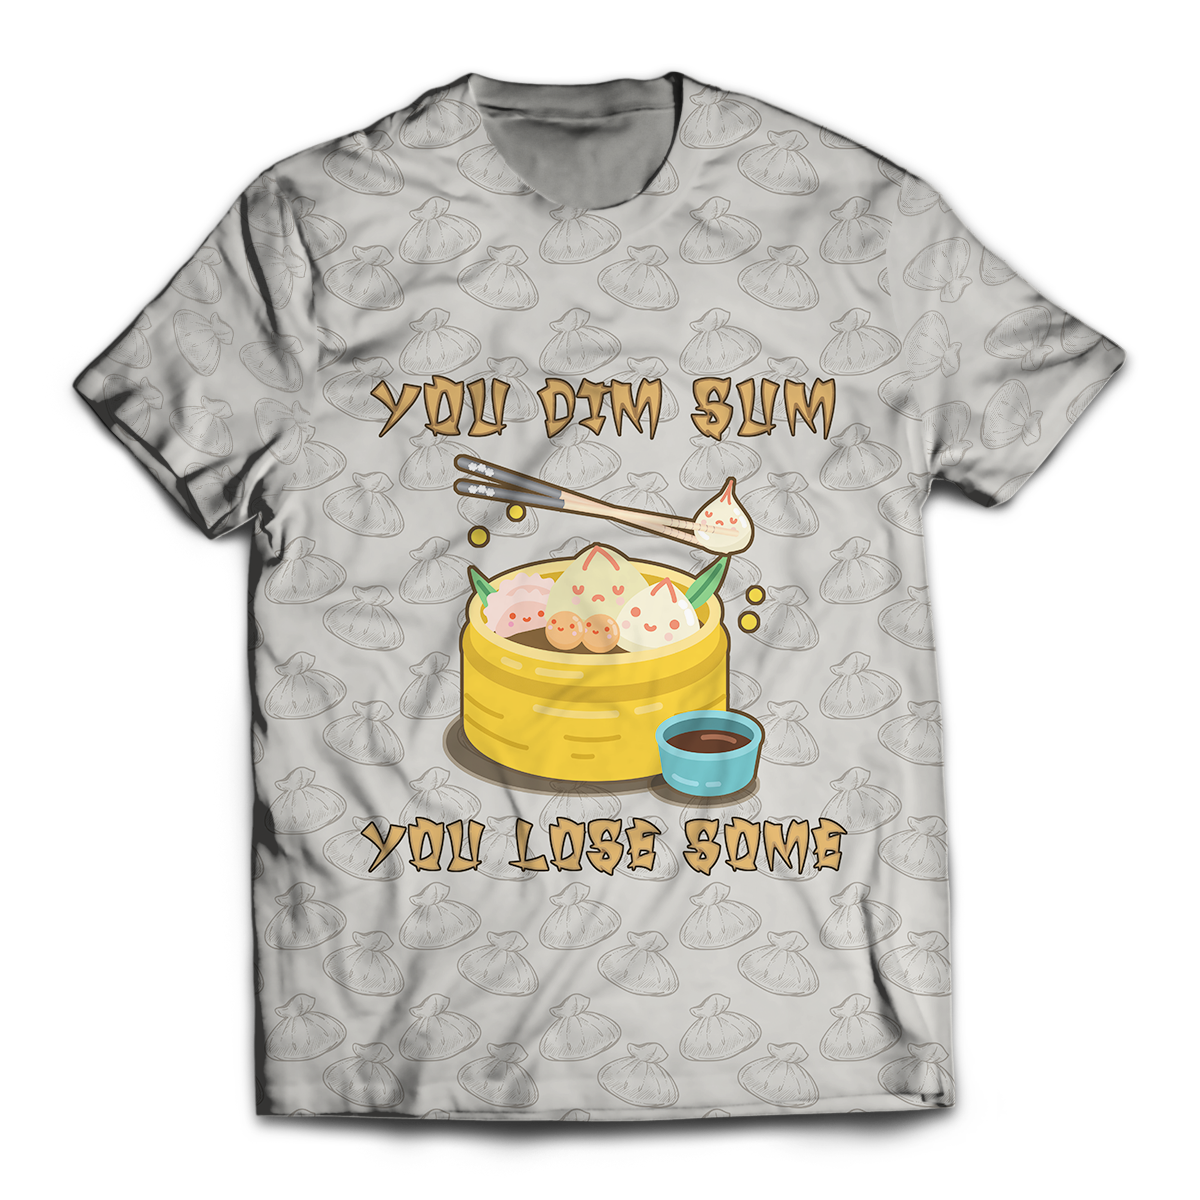 You Dim sum you Lose some Unisex T-Shirt